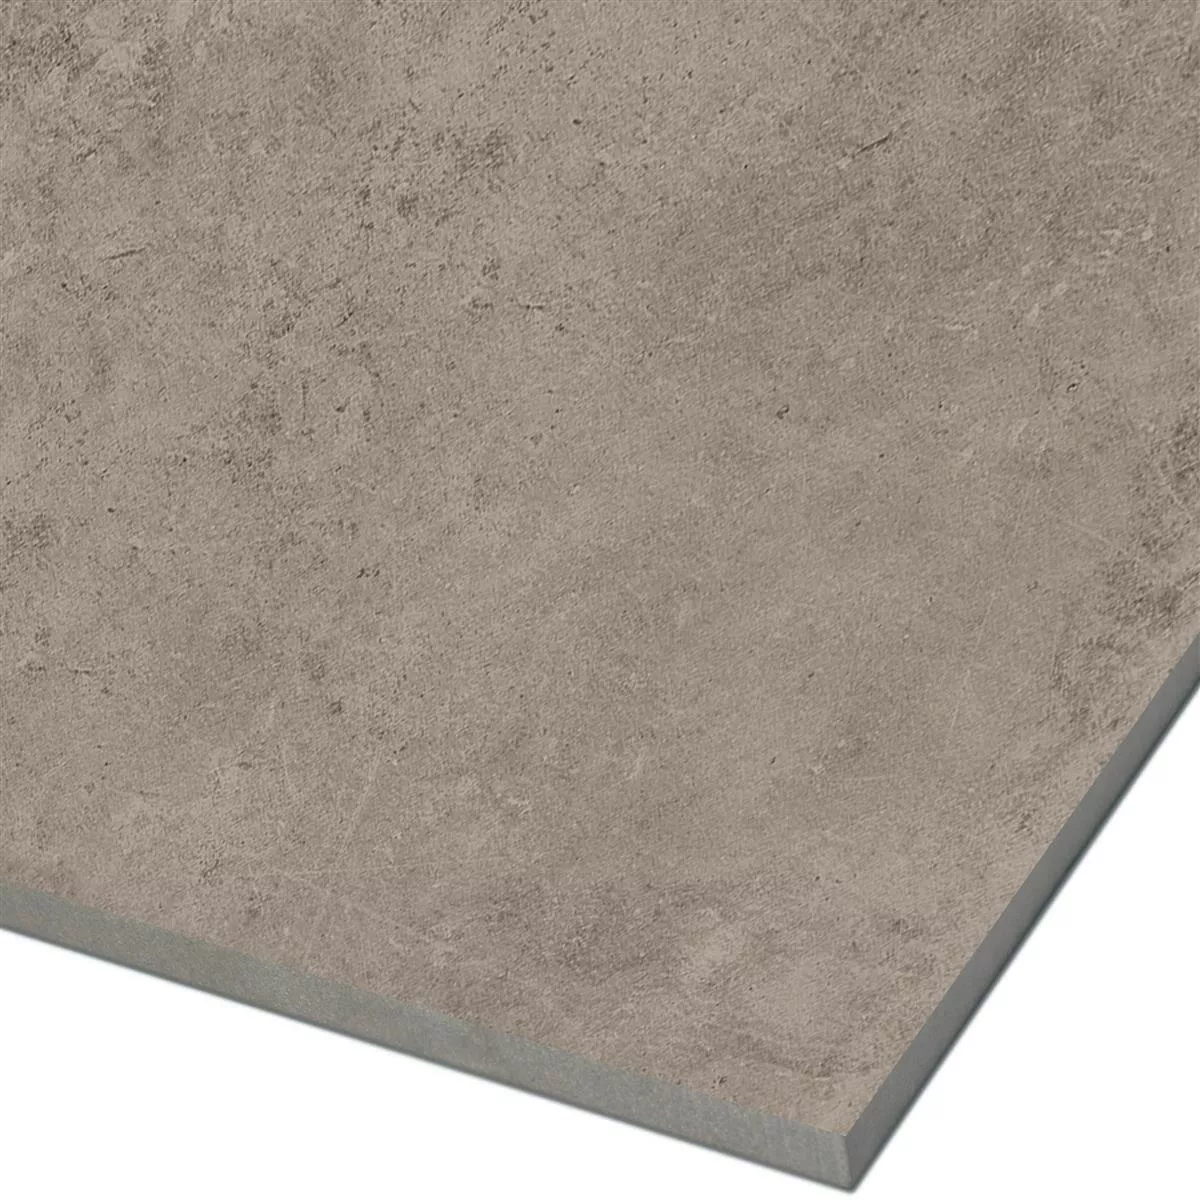 Sample Floor Tiles Colossus Taupe 30x60cm